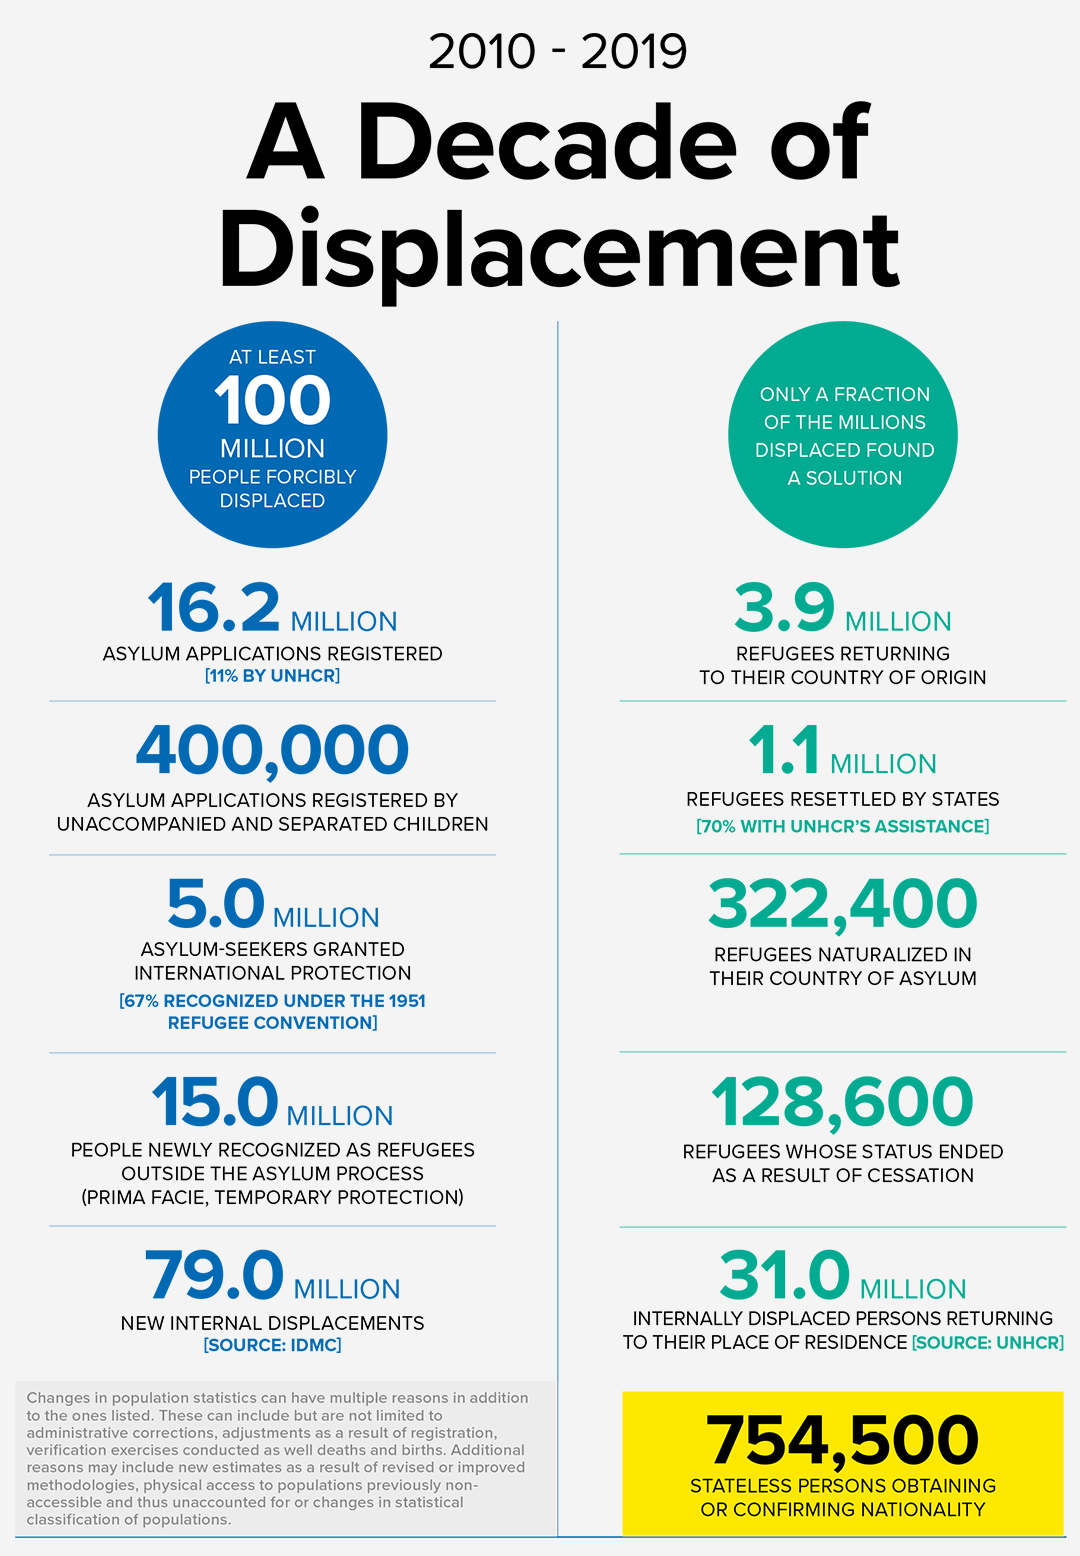 A DECADE OF DISPLACEMENT